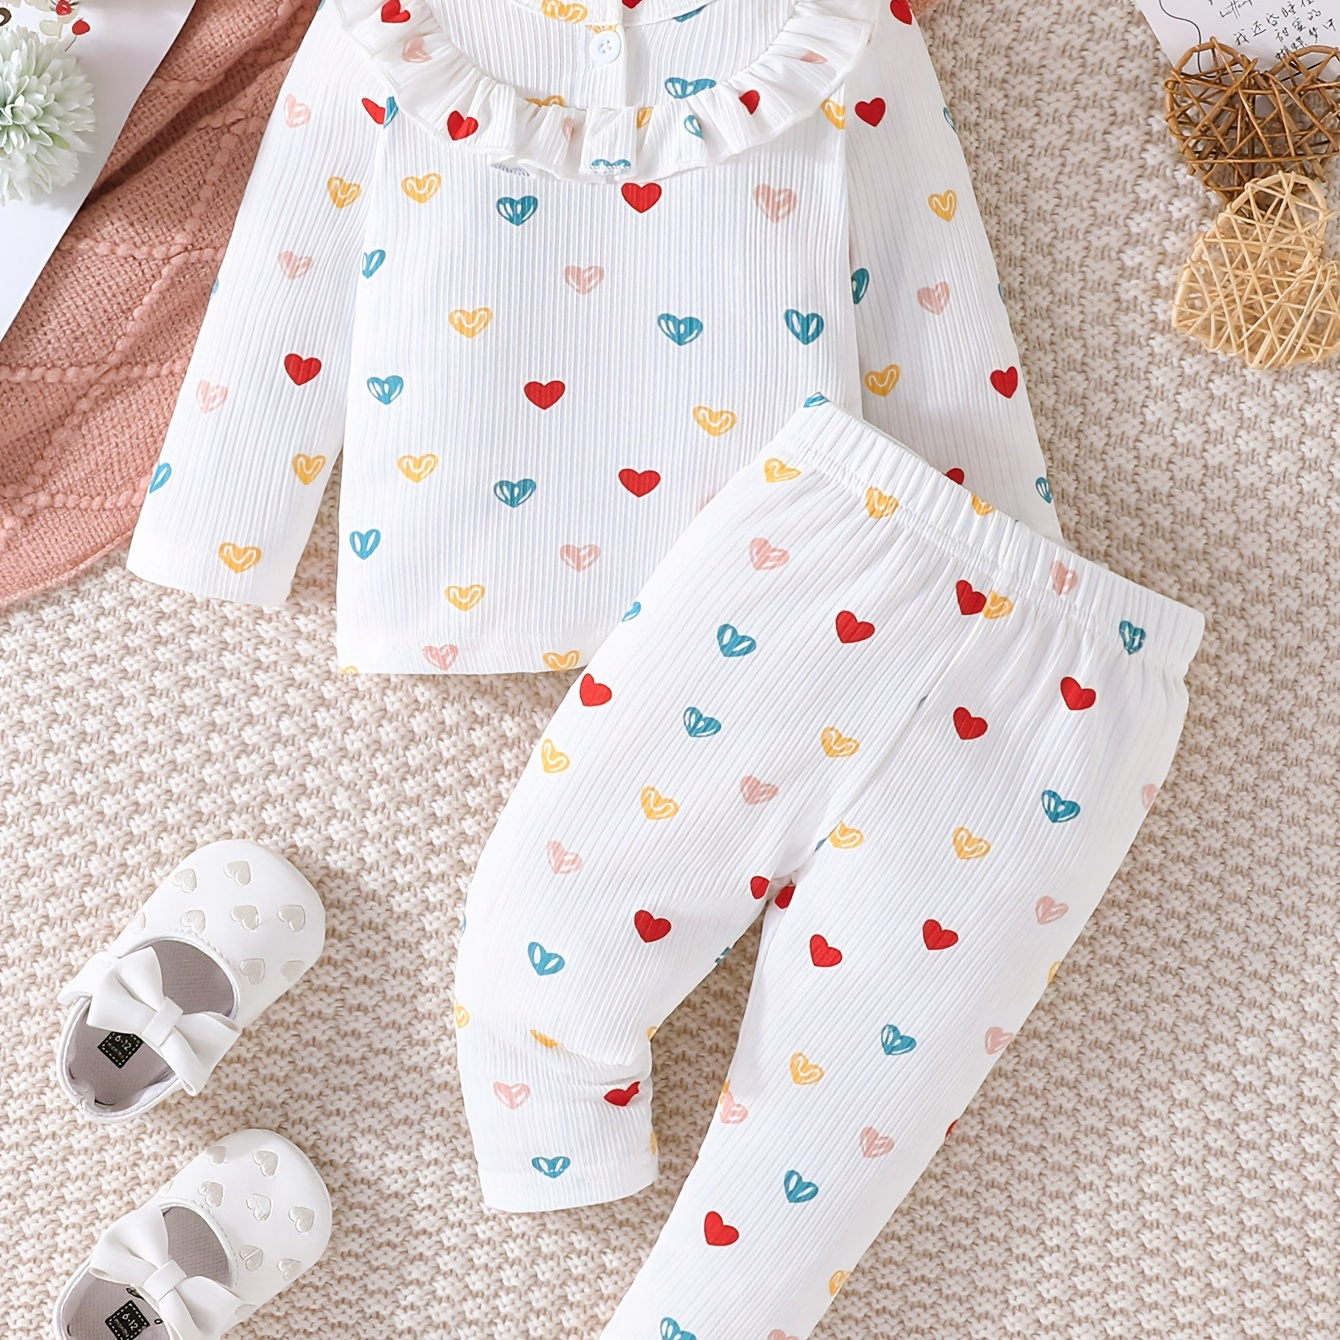 

Baby Girl's Cute And Sweet Outfits, New Thin Love Pattern Printed Ruffle Collar Top And Trousers 2pcs Set